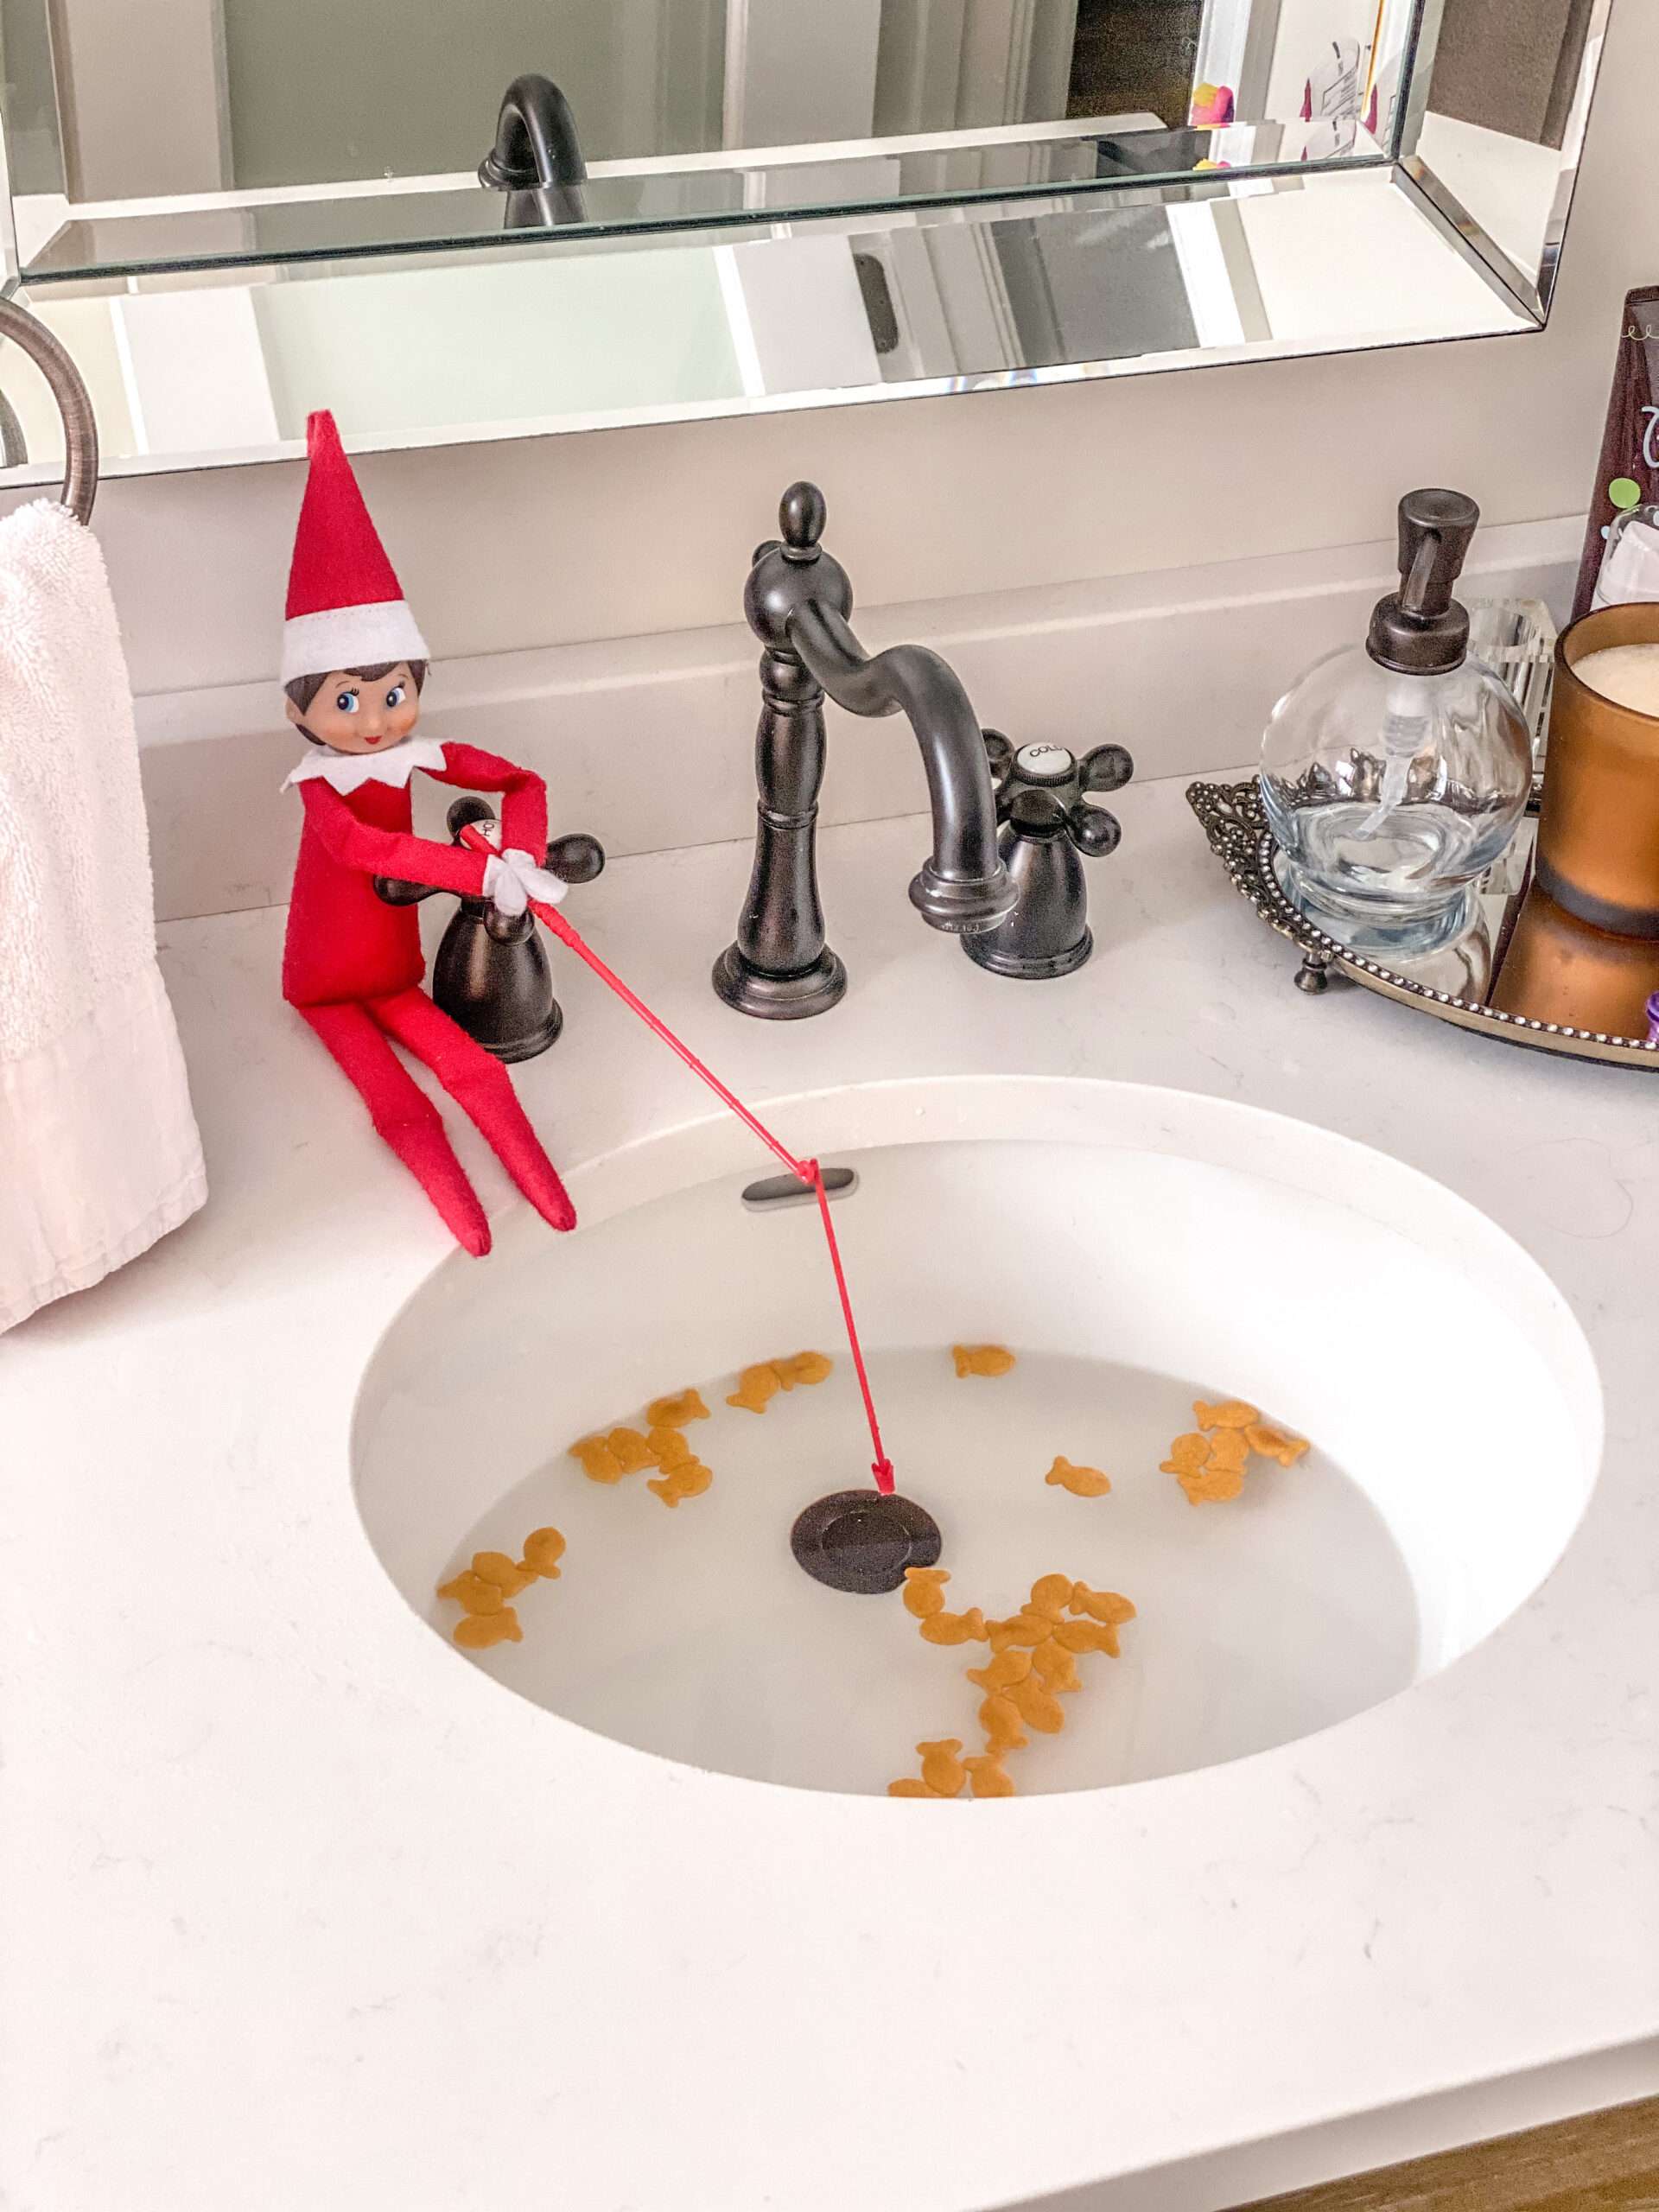 Fishing in the sink with goldfish crackers. Fun & easy Elf on the Shelf ideas for your toddler or little kid. Quick to setup and lots of naughty and nice ideas, perfect to bring some Christmas magic to your home. #ElfOnTheShelf #ElfIdeas #ElfOnTheShelfIdeas #Christmas #ChristmasMagic